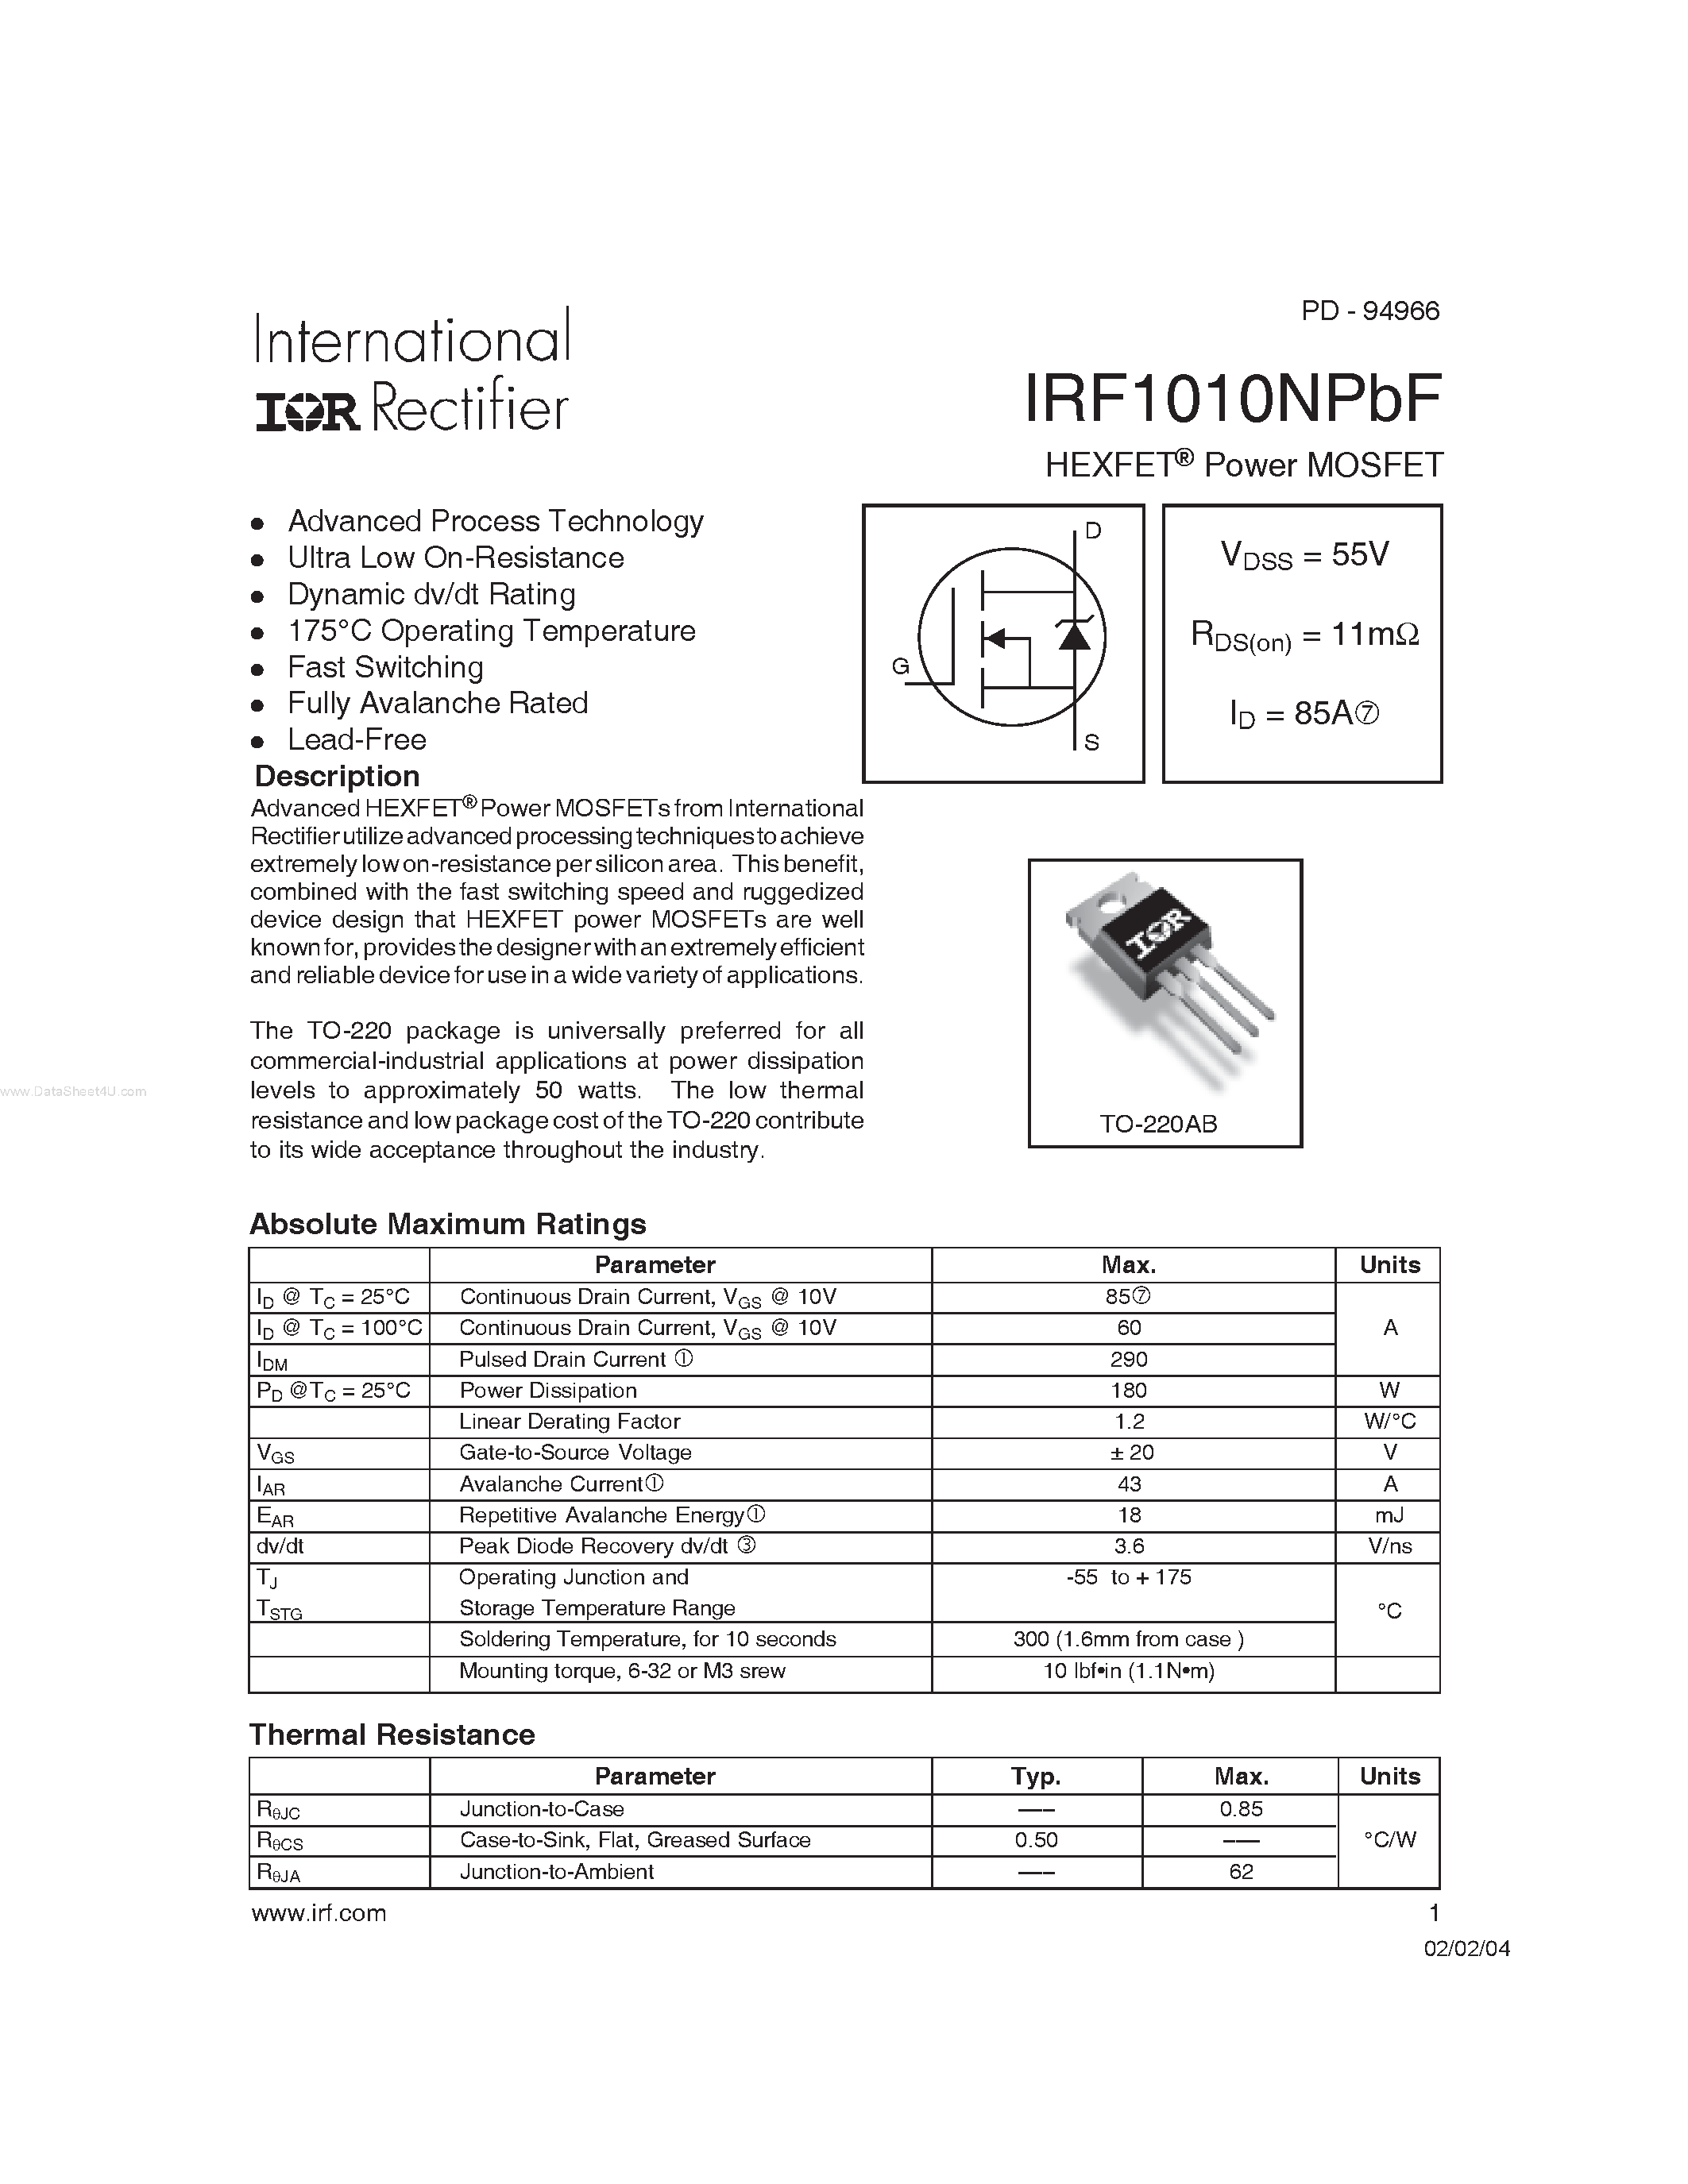 Datasheet IRF1010NPBF - HEXFET Power MOSFET page 1